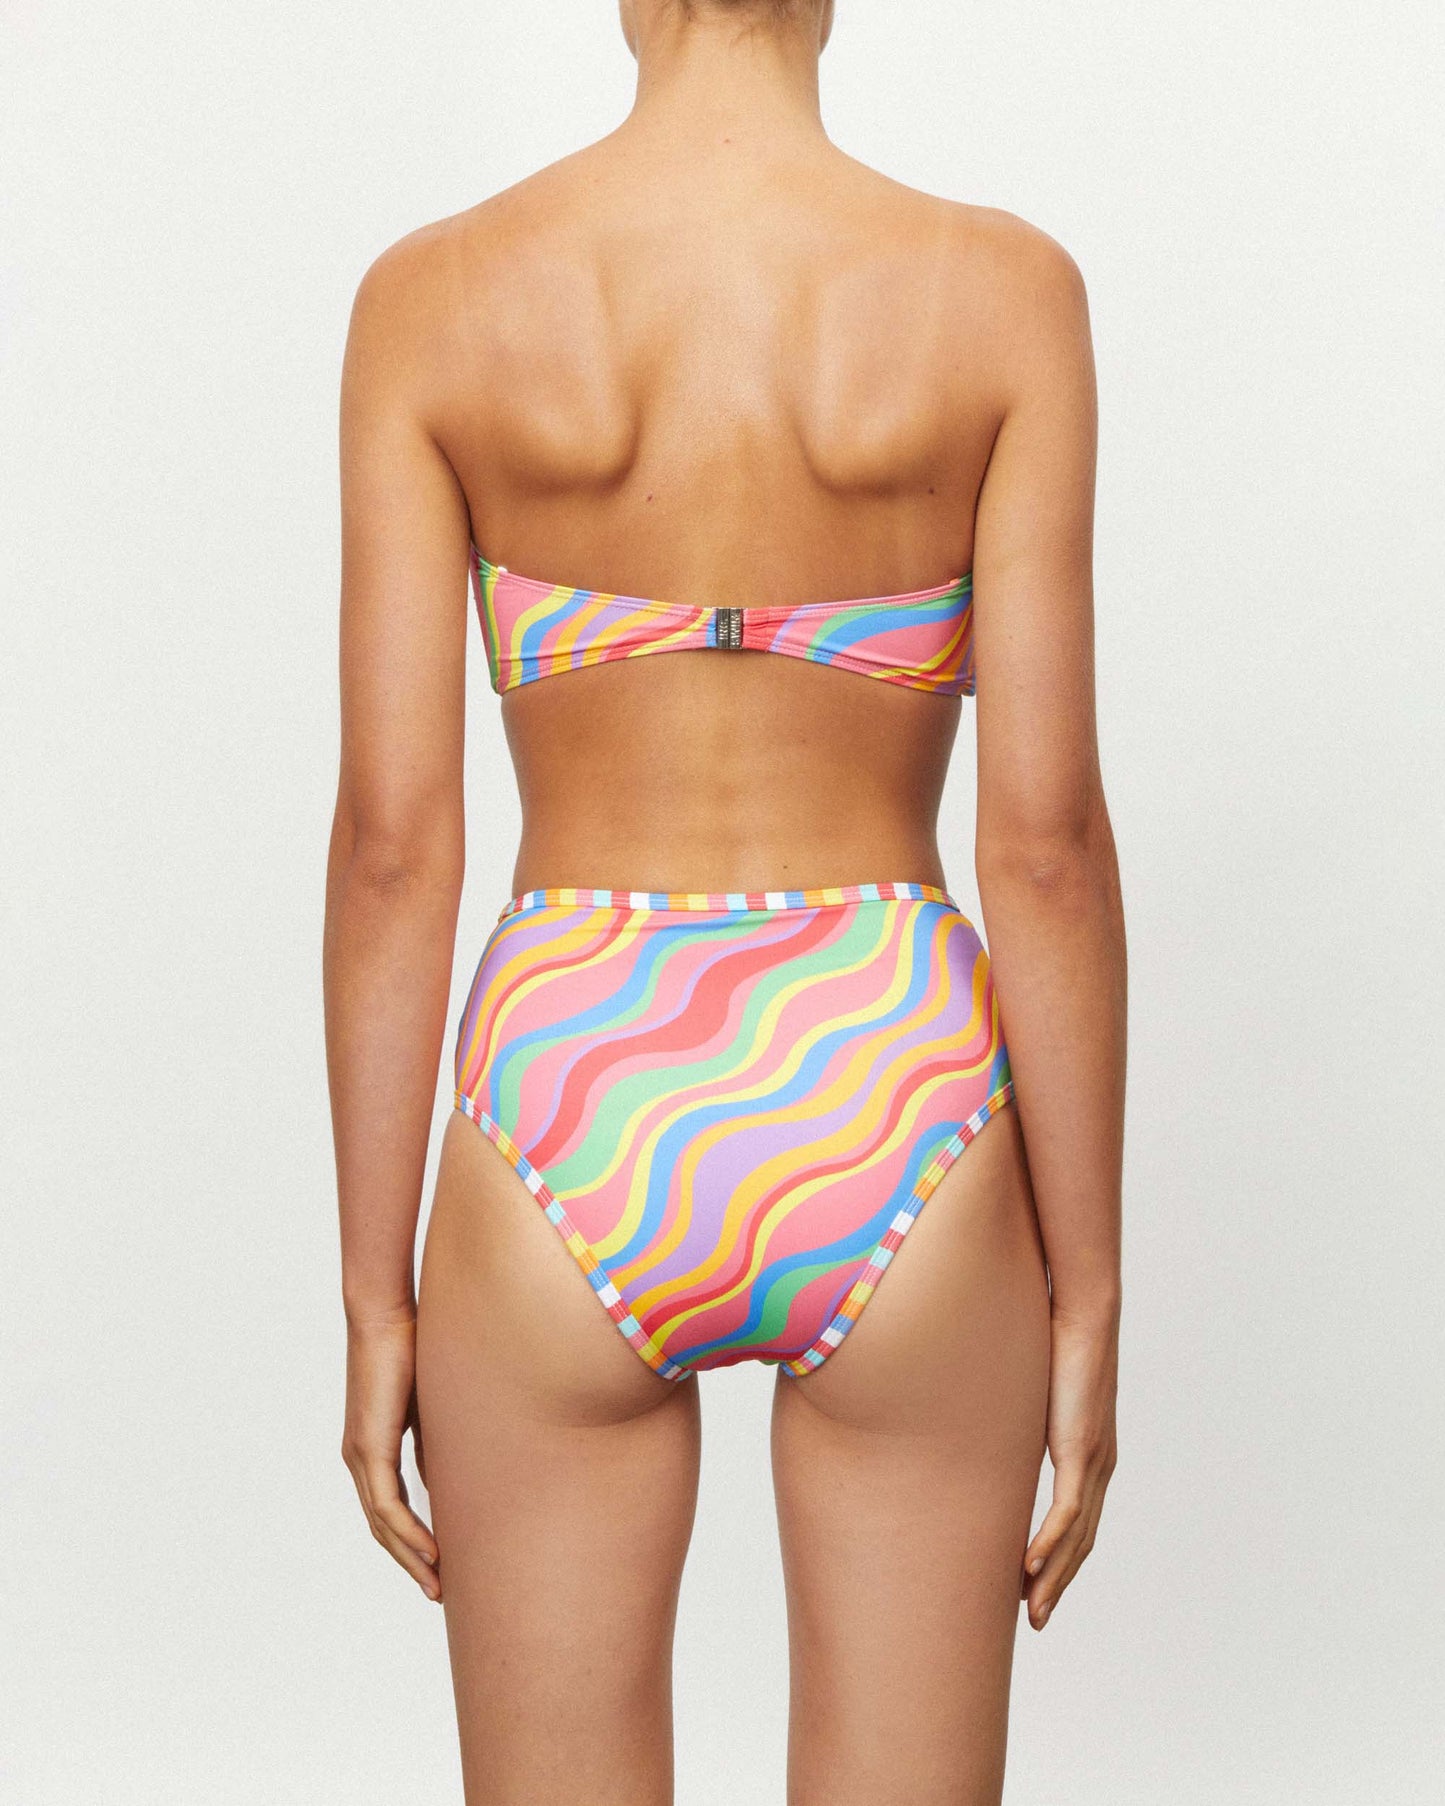 On body back of THE KNOT ECO BANDEAU - RAINBOW